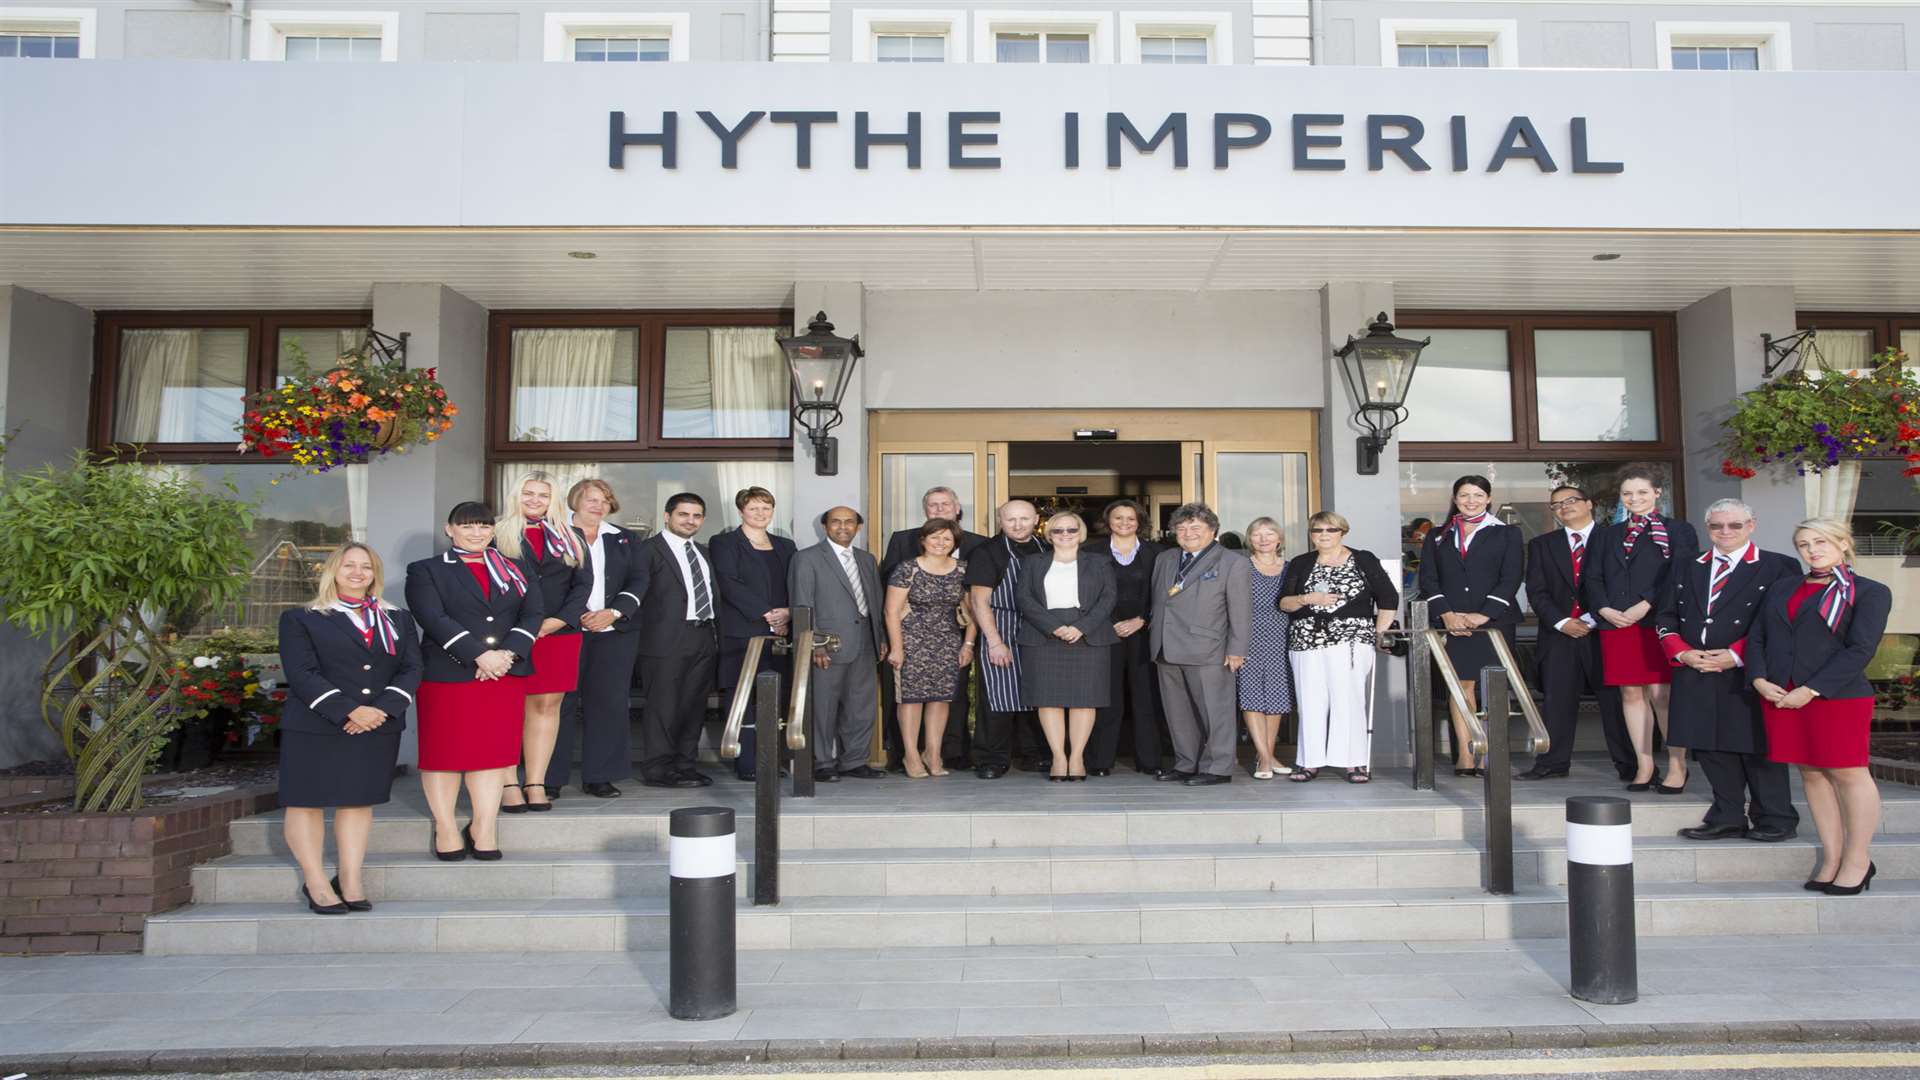 Len Louis, chief executive of Classic British Hotels, and Michael Lyons, the Mayor of Hythe, join staff of the Hythe Imperial at the launch event